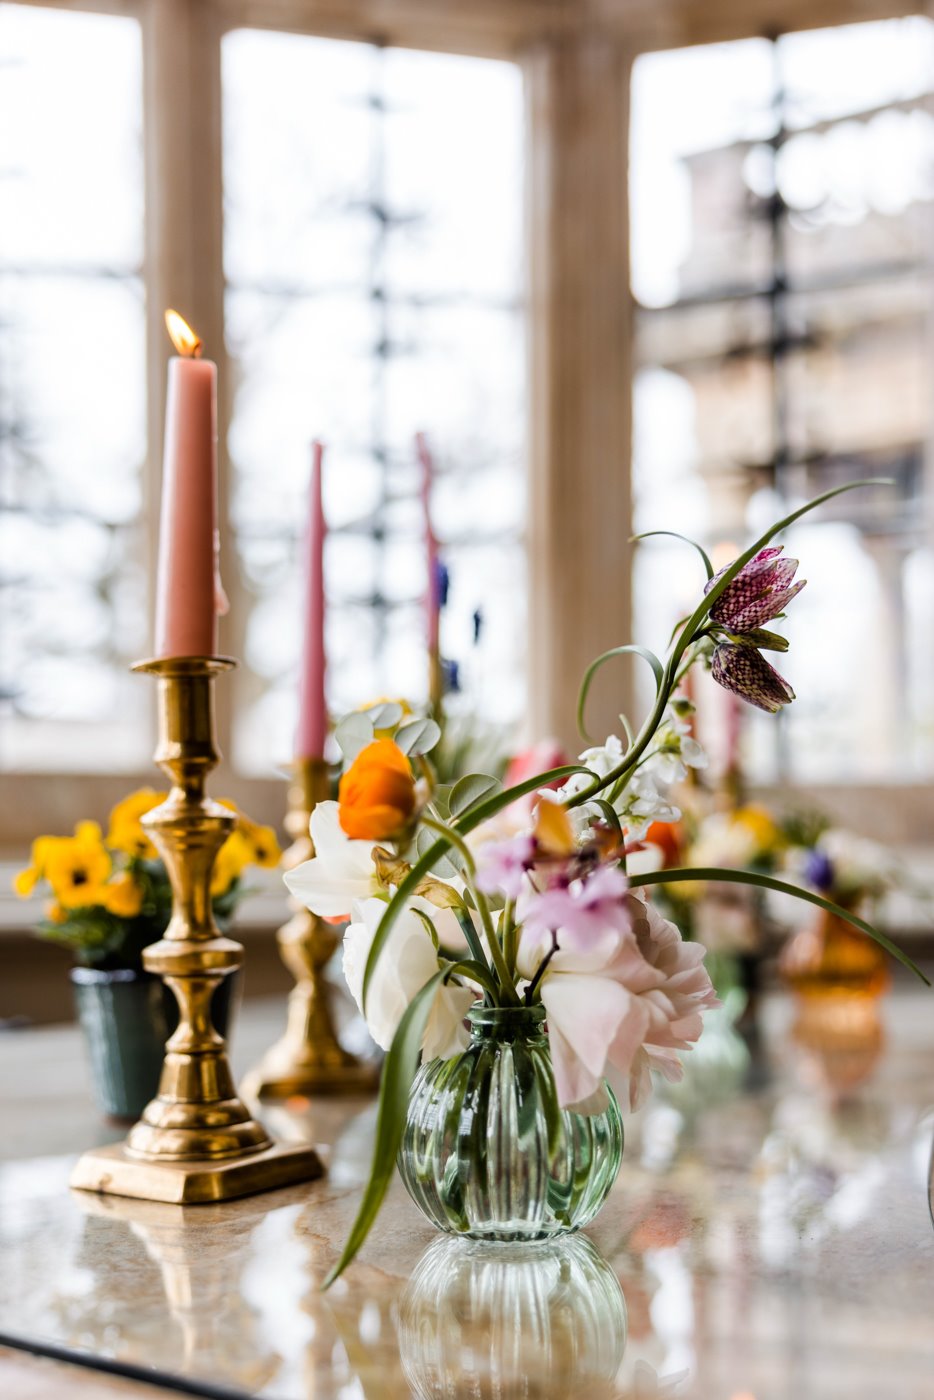 Delicate wild flowers in tiny glass vase and potted flowers with pink candlesticks in gold candlestick holder in mullioned glass windows of stately home wedding venue elmore court for a wild wedding fair